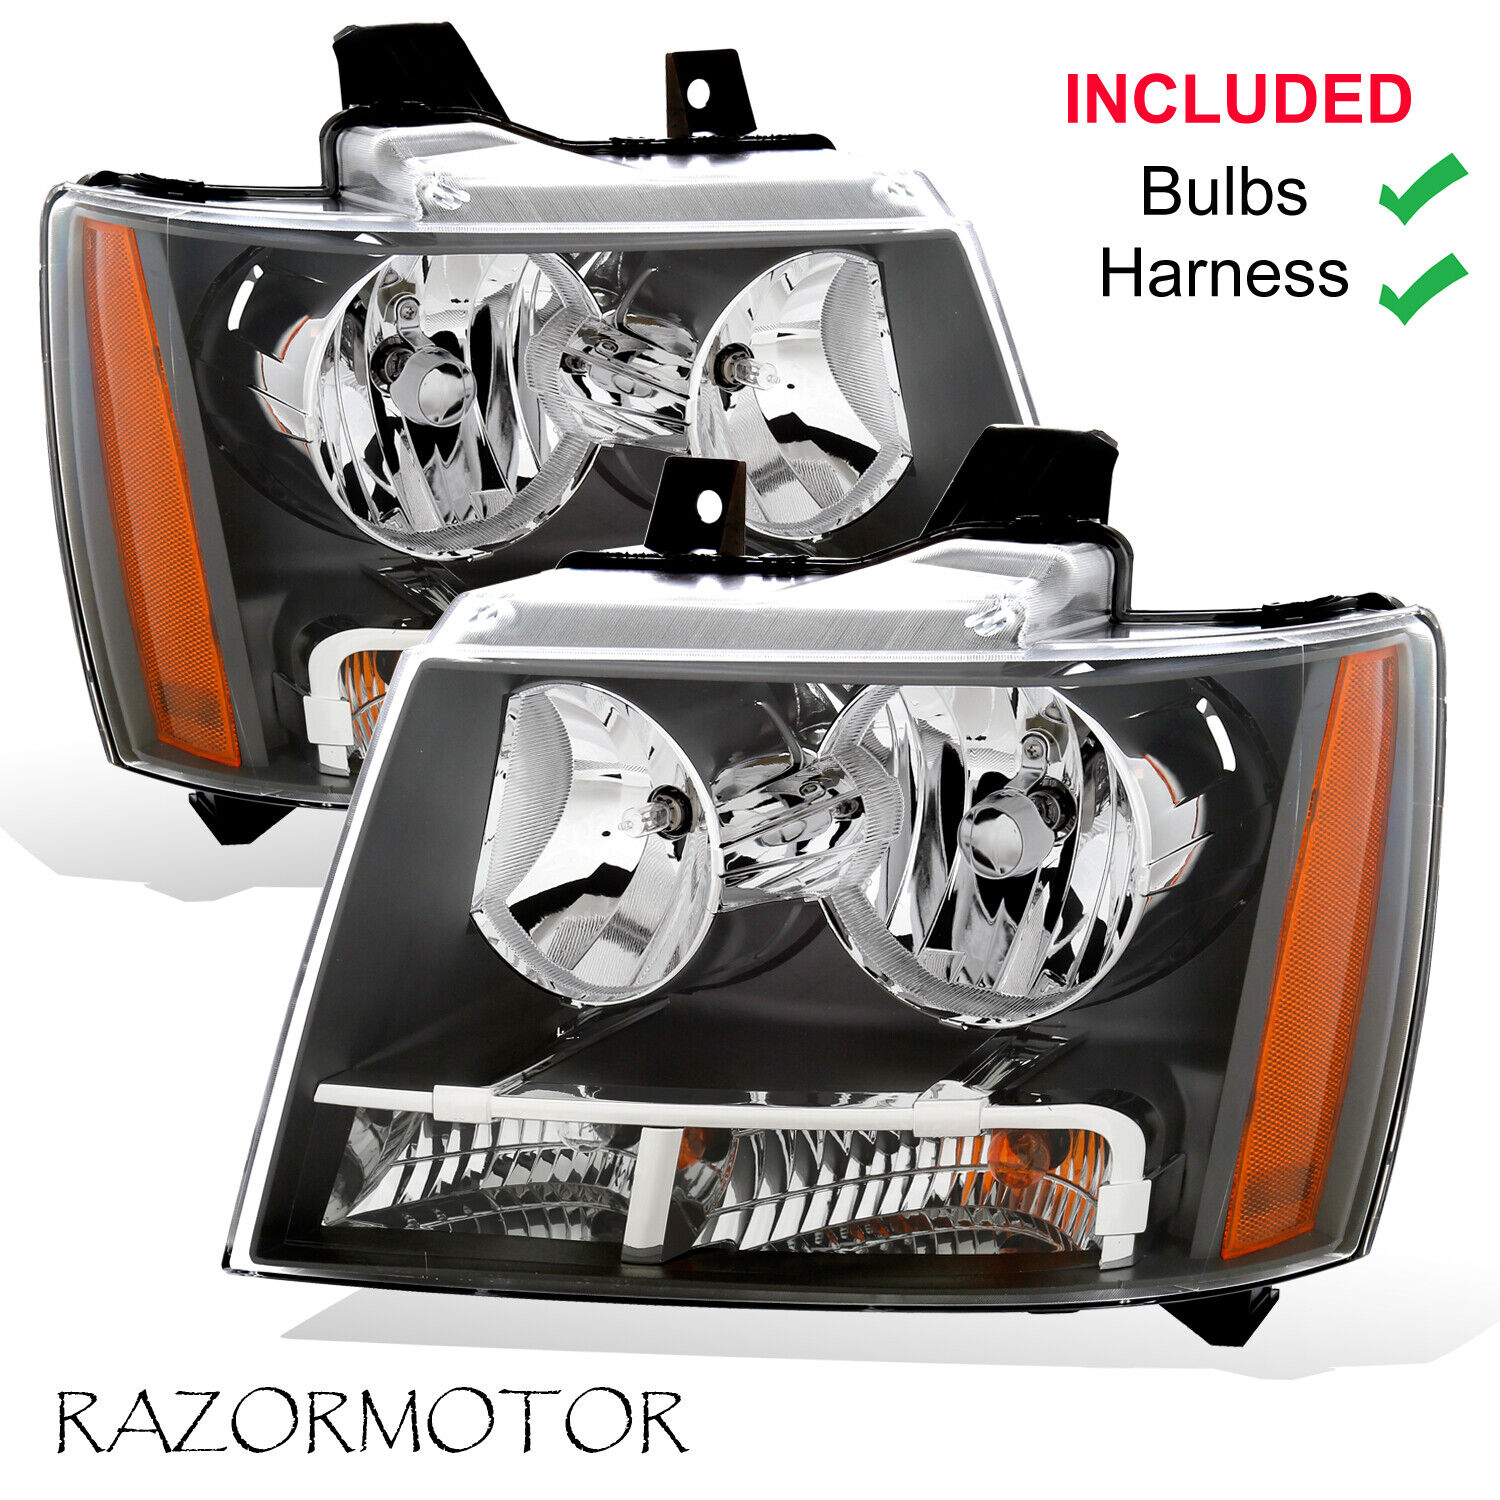 2007-2014 Replacement Headlight Pair For Chevy Suburban/Tahoe/Avalanche W/ Bulb